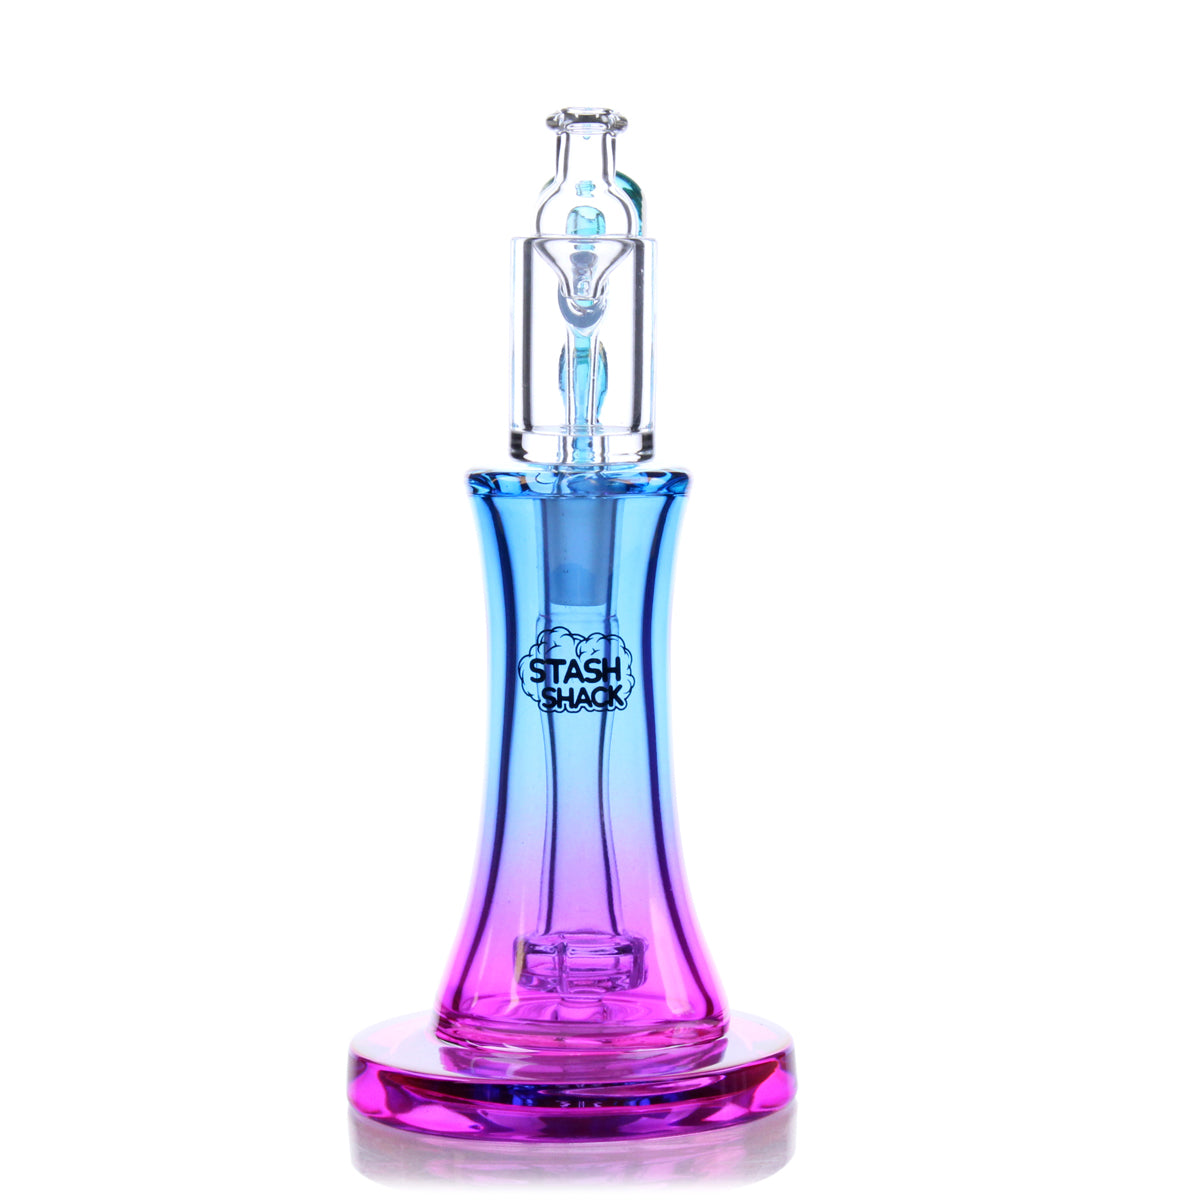 Aurelia Mini Rig by The Stash Shack in blue to purple gradient, compact 5" borosilicate glass, front view